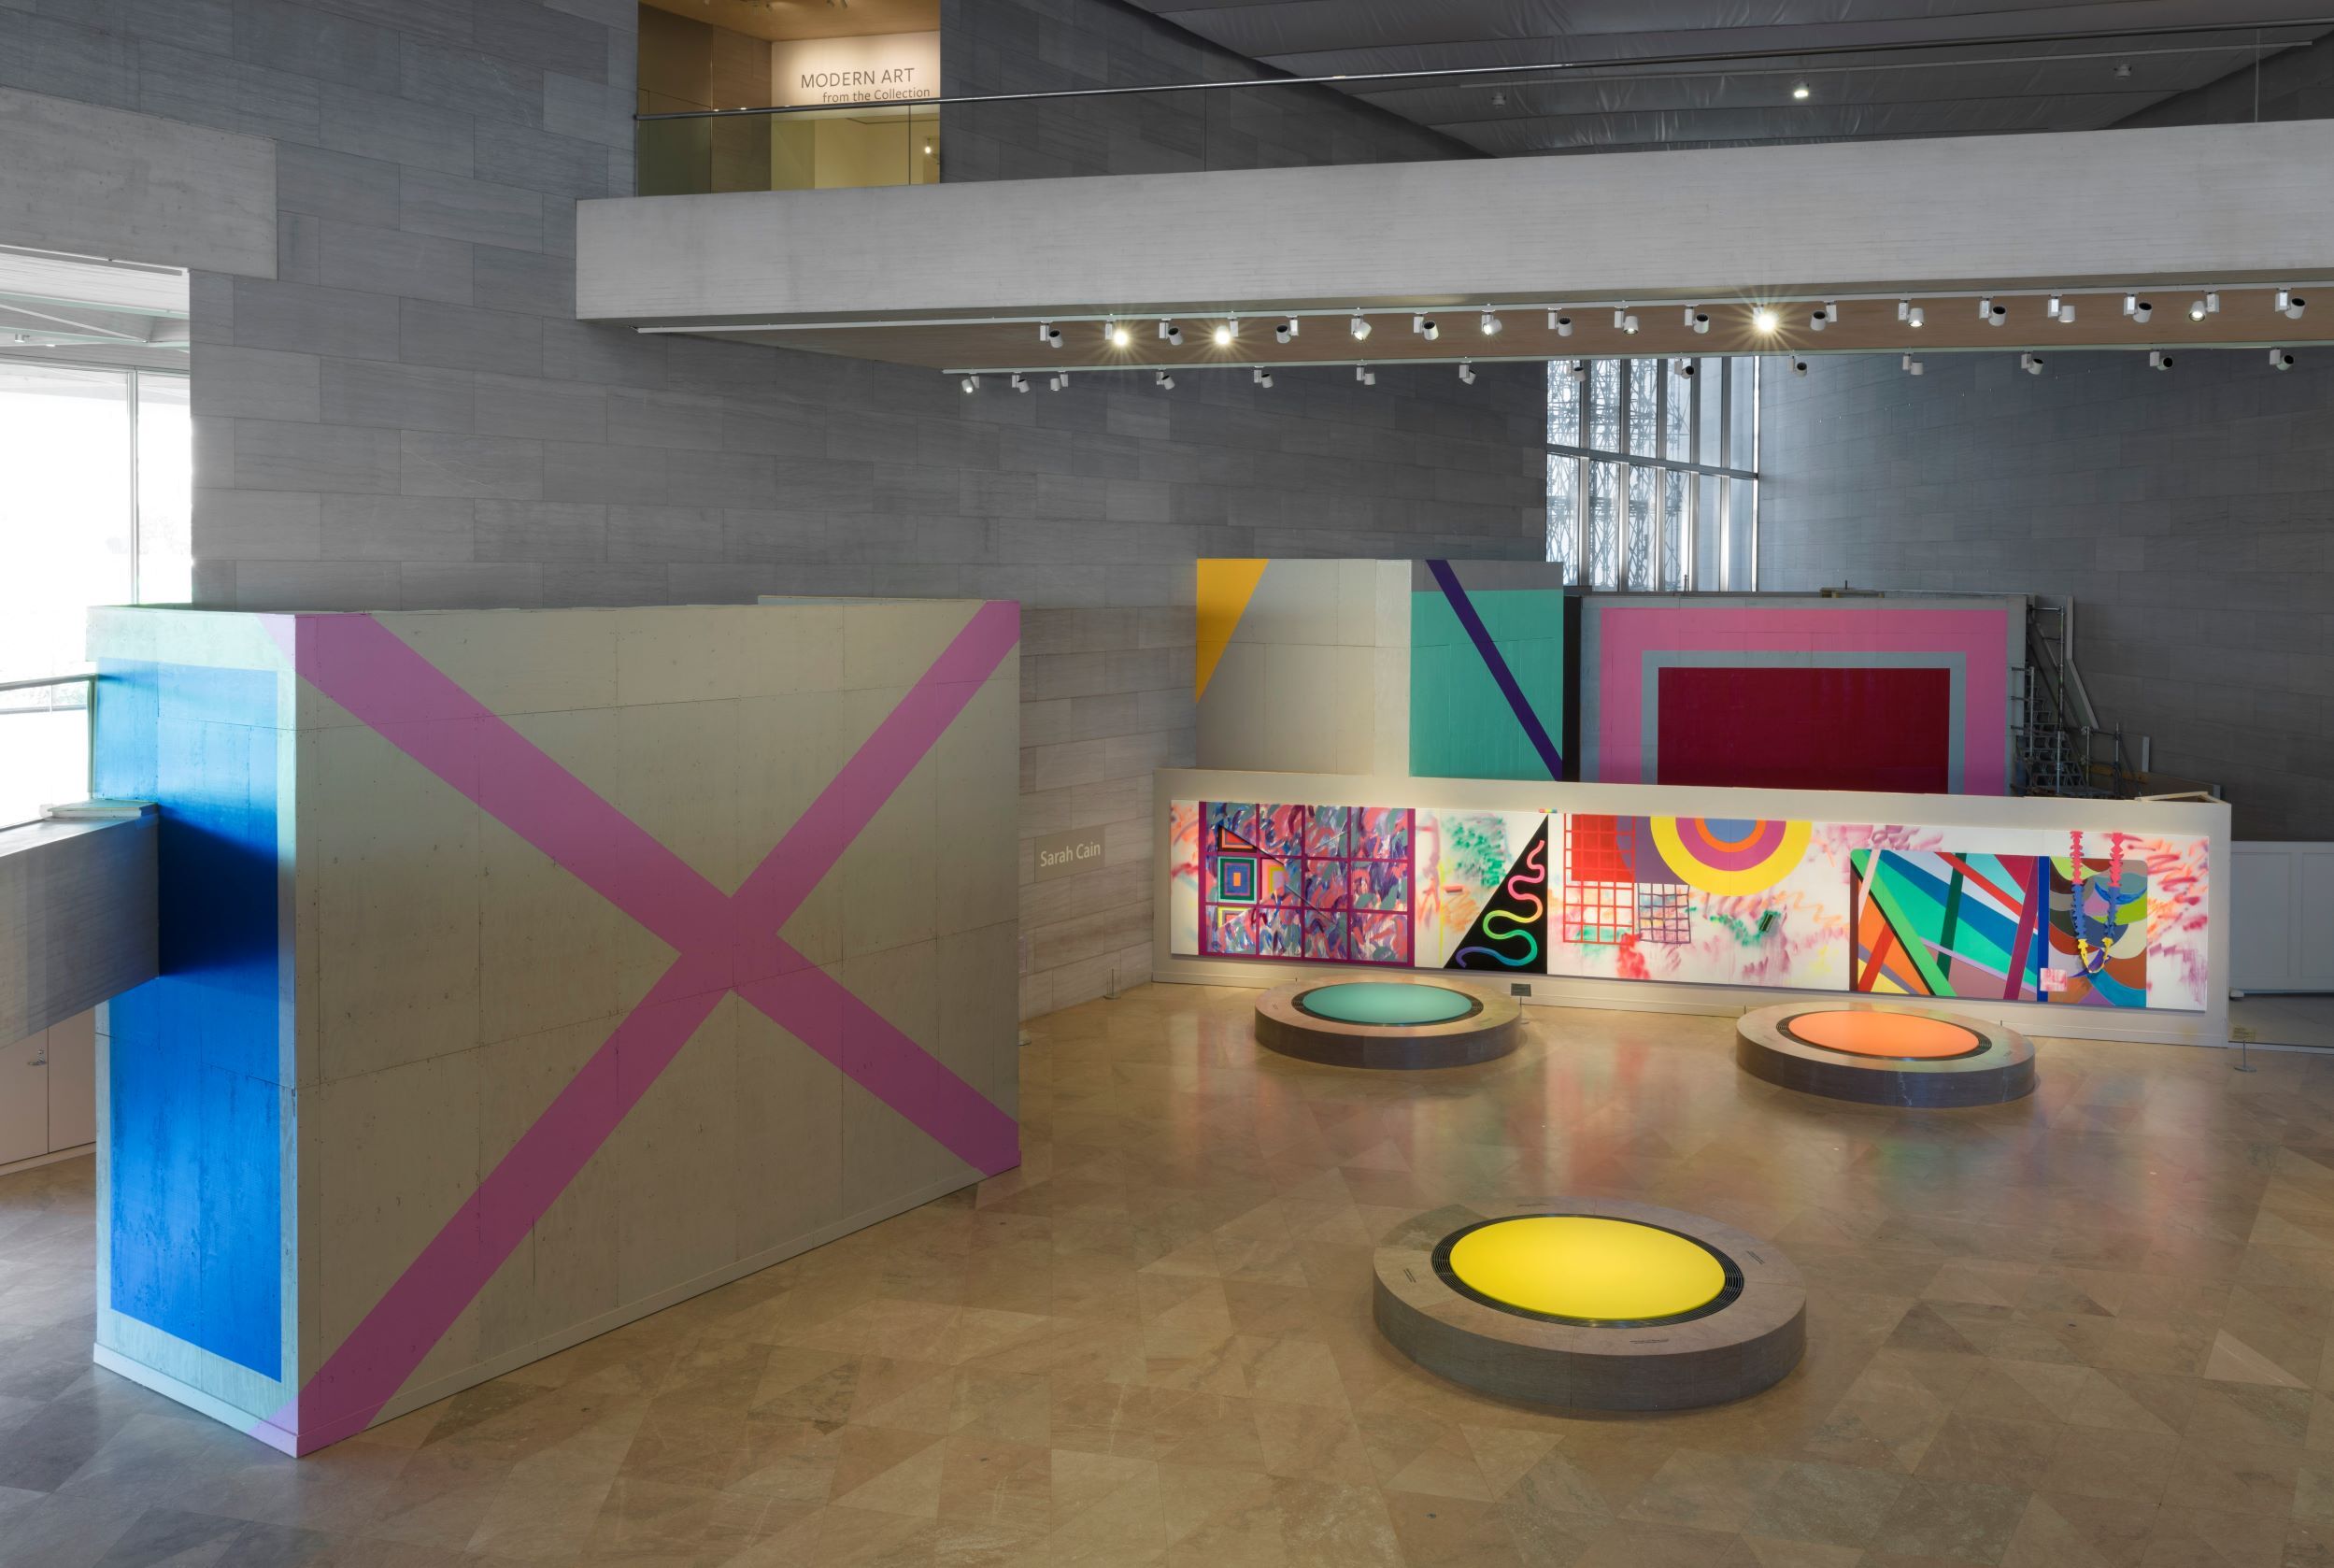 Sarah Cain, Installation view of My favorite season is the fall of the patriarchy, 2021, National Gallery of Art, Washington, D.C. Photo: Jeff McLane, courtesy of the artist.